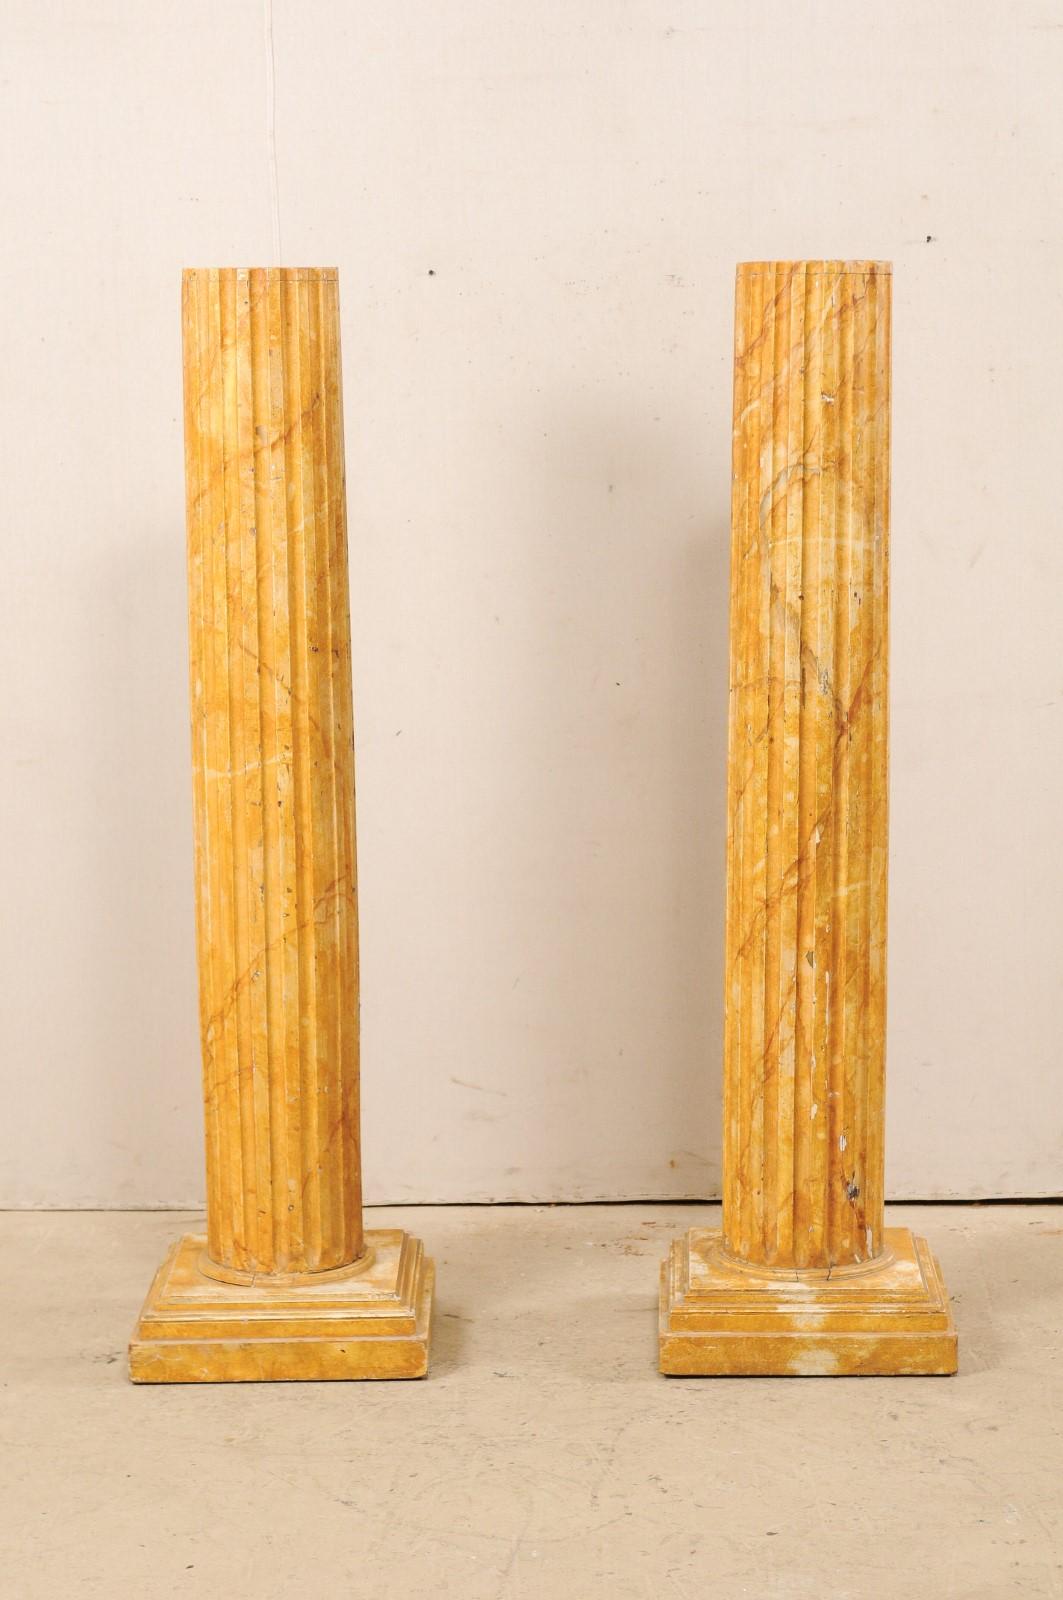 A pair of French fluted wood columns with faux marbling from the mid-20th century. These vintage pedestal columns from France feature round-shaped and fluted shafts, with a flat top, and raised upon stacked square bases. The columns have a faux